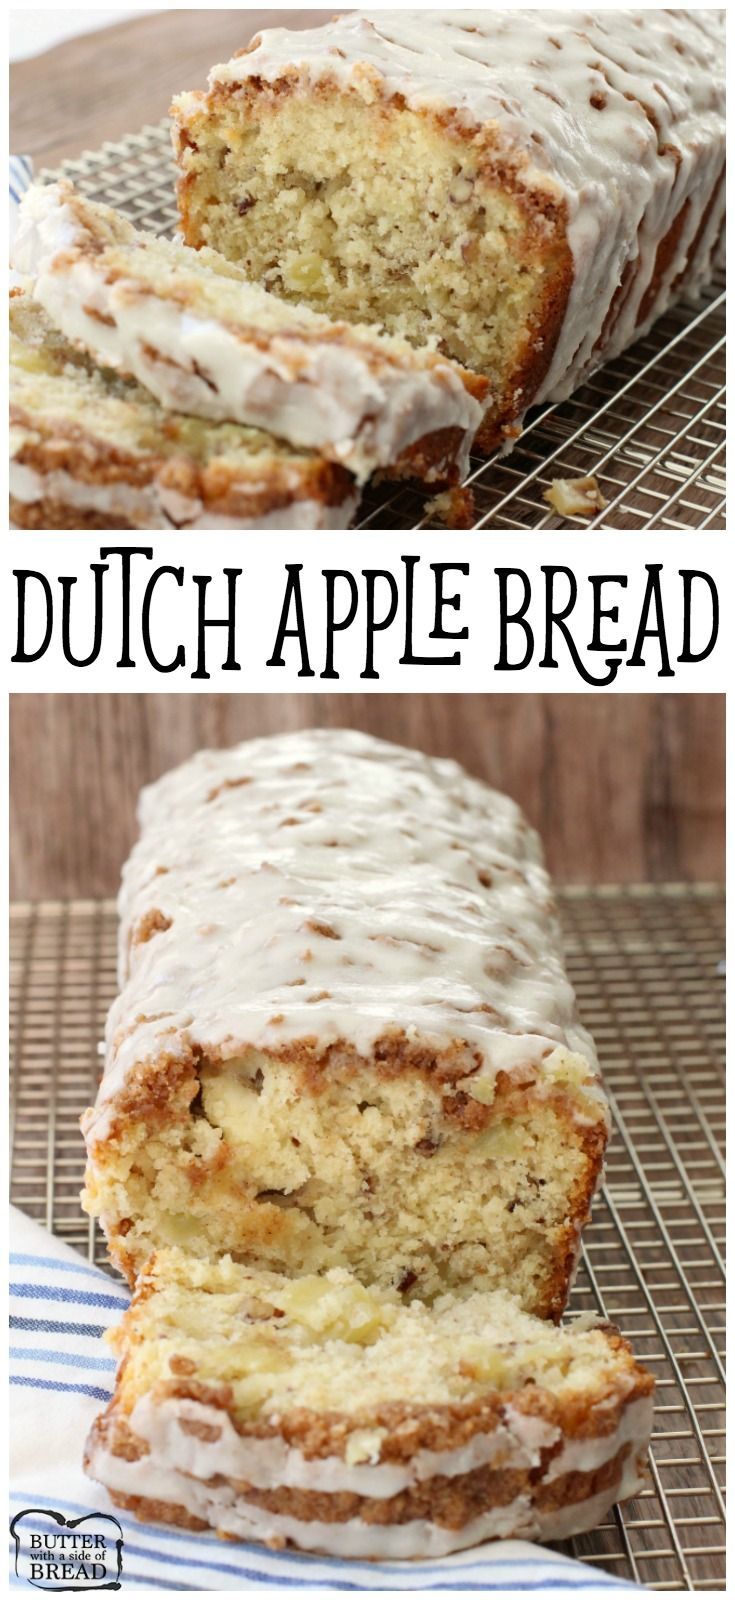 Dutch Apple Bread - recipe for homemade bread with wonderful flavor & filled with fresh apple. Butter With A Side of Bread -   23 apple recipes vegan
 ideas